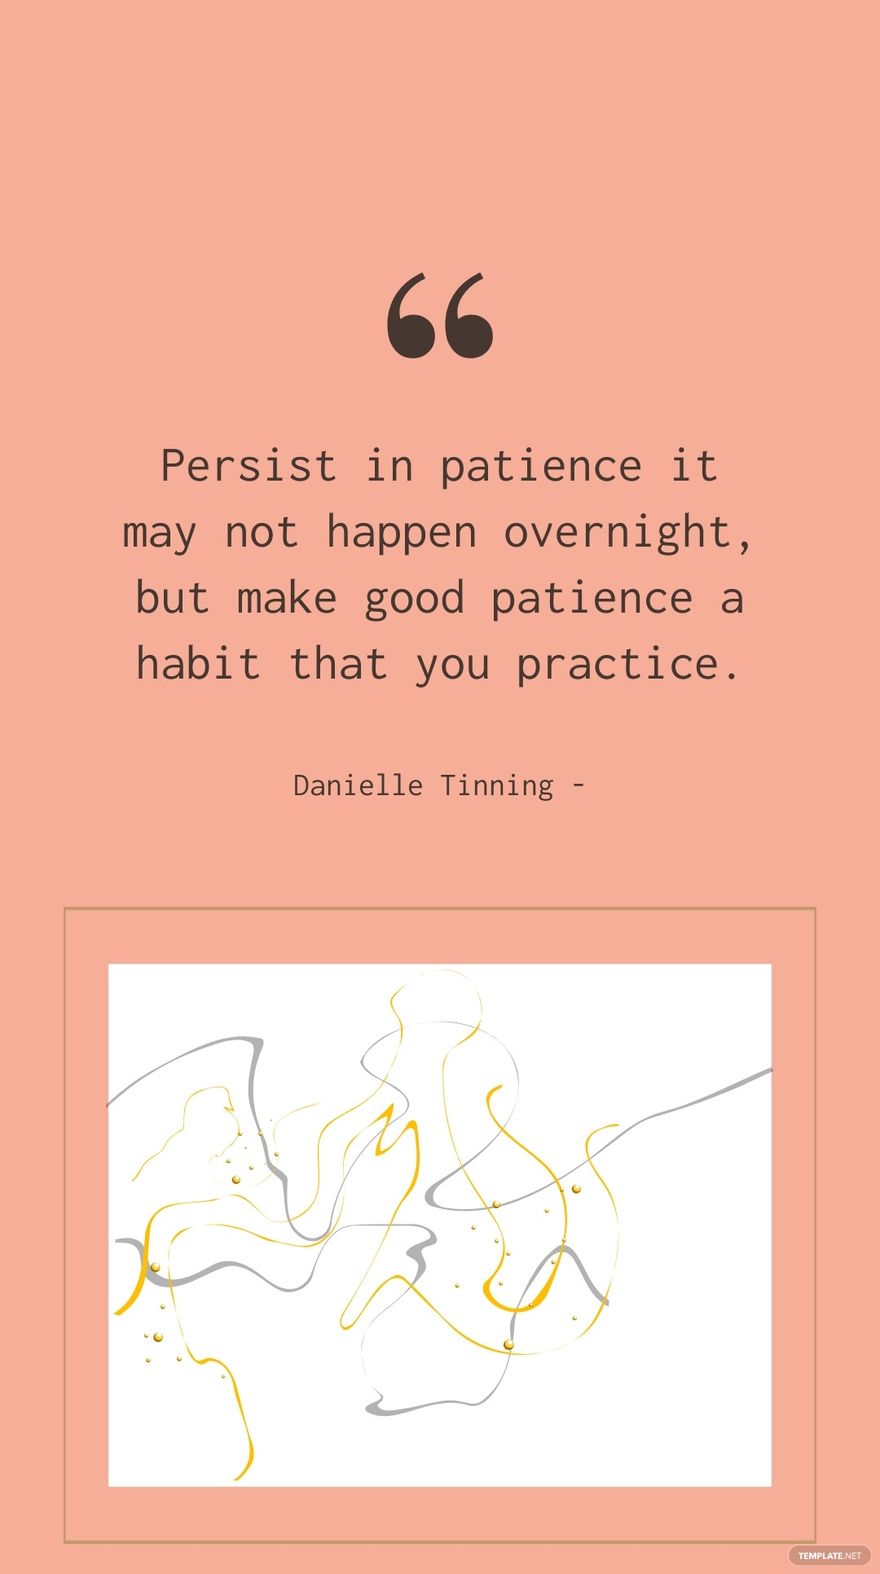 Free Danielle Tinning - Persist in patience it may not happen overnight, but make good patience a habit that you practice. in JPG